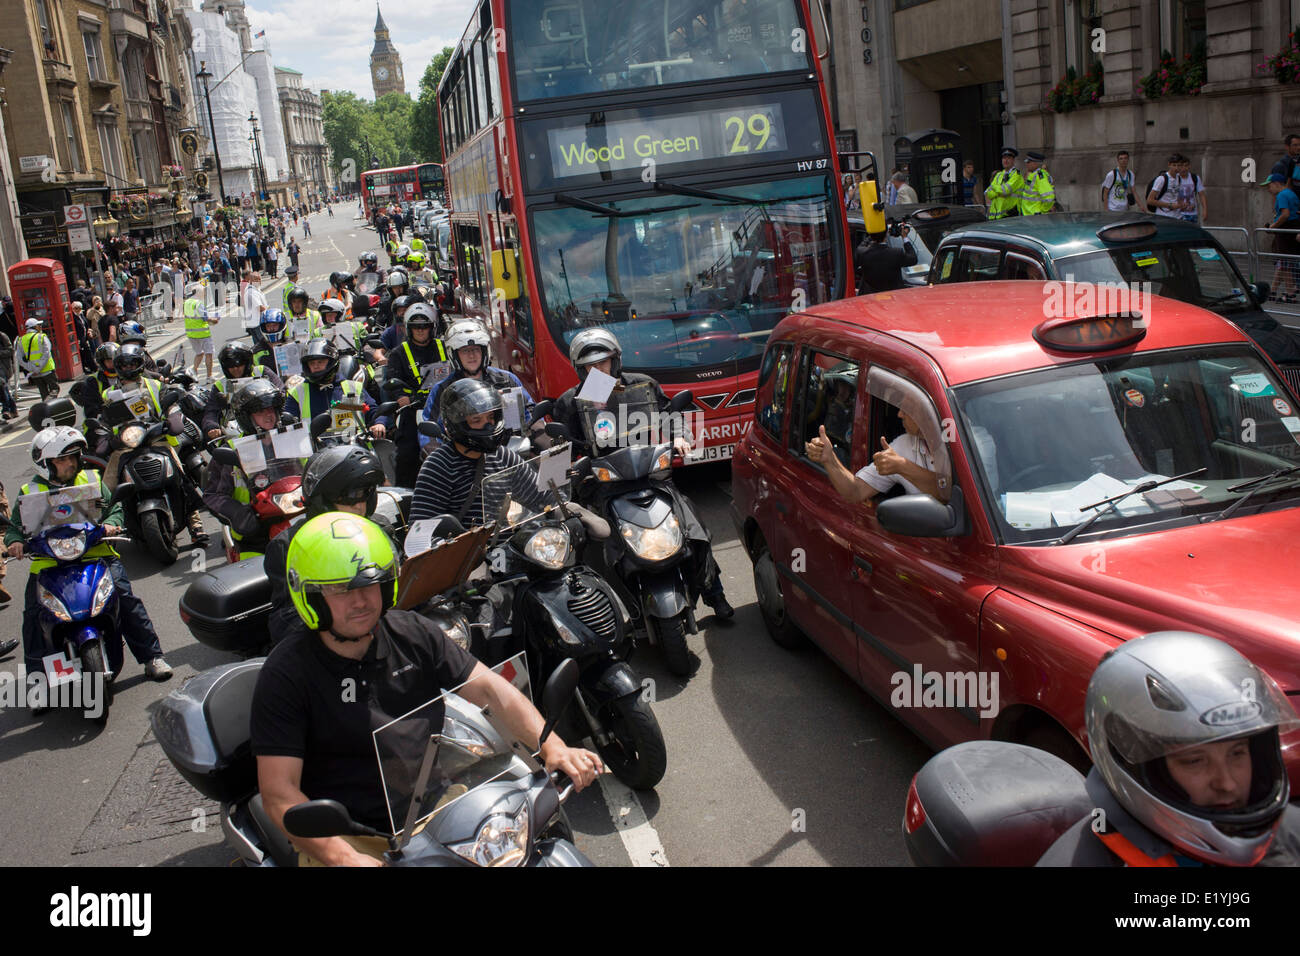 Black taxi cab drivers protest in Whitehall, central London, objecting to a new online booking and journey fare app called Uber. The app works out the cost of journeys and cab drivers say it is the same as using a taxi meter, which only black cabs are legally entitled to use. The London Taxi Driver Association (LTDA) also said part of the demonstration was about highlighting the length of training - between four and seven years - taxi drivers undergo before being licensed. During the protest roads were gridlocked around Parliament Square, Whitehall and Trafalgar Square in capital's West End. Stock Photo